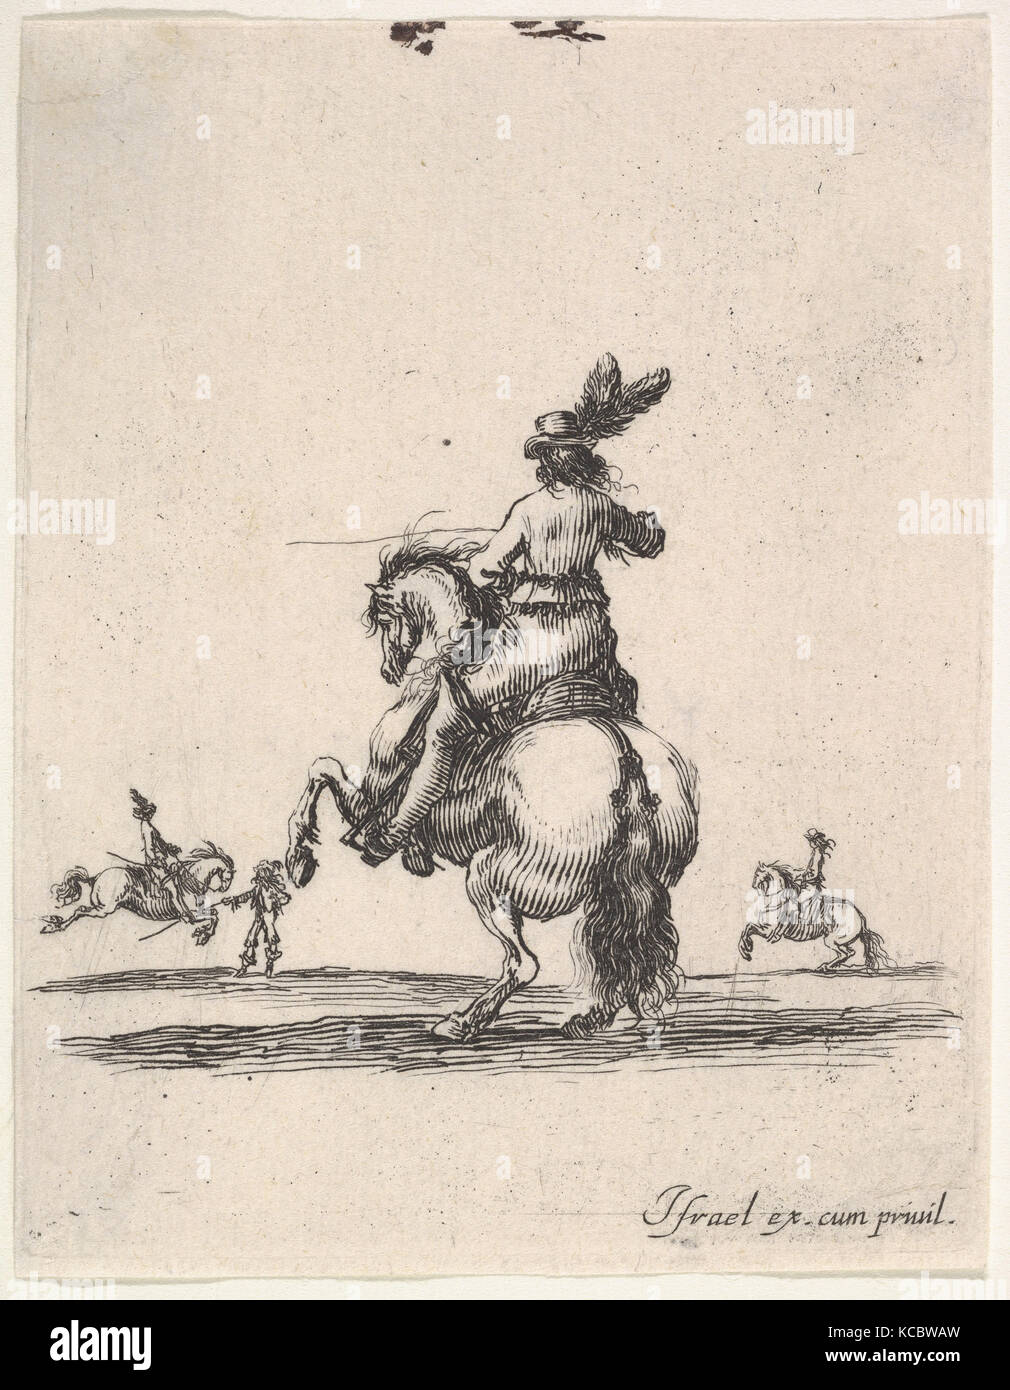 A horseman atop a rearing horse, seen from behind and turned towards the left, two horsemen in the background Stock Photo